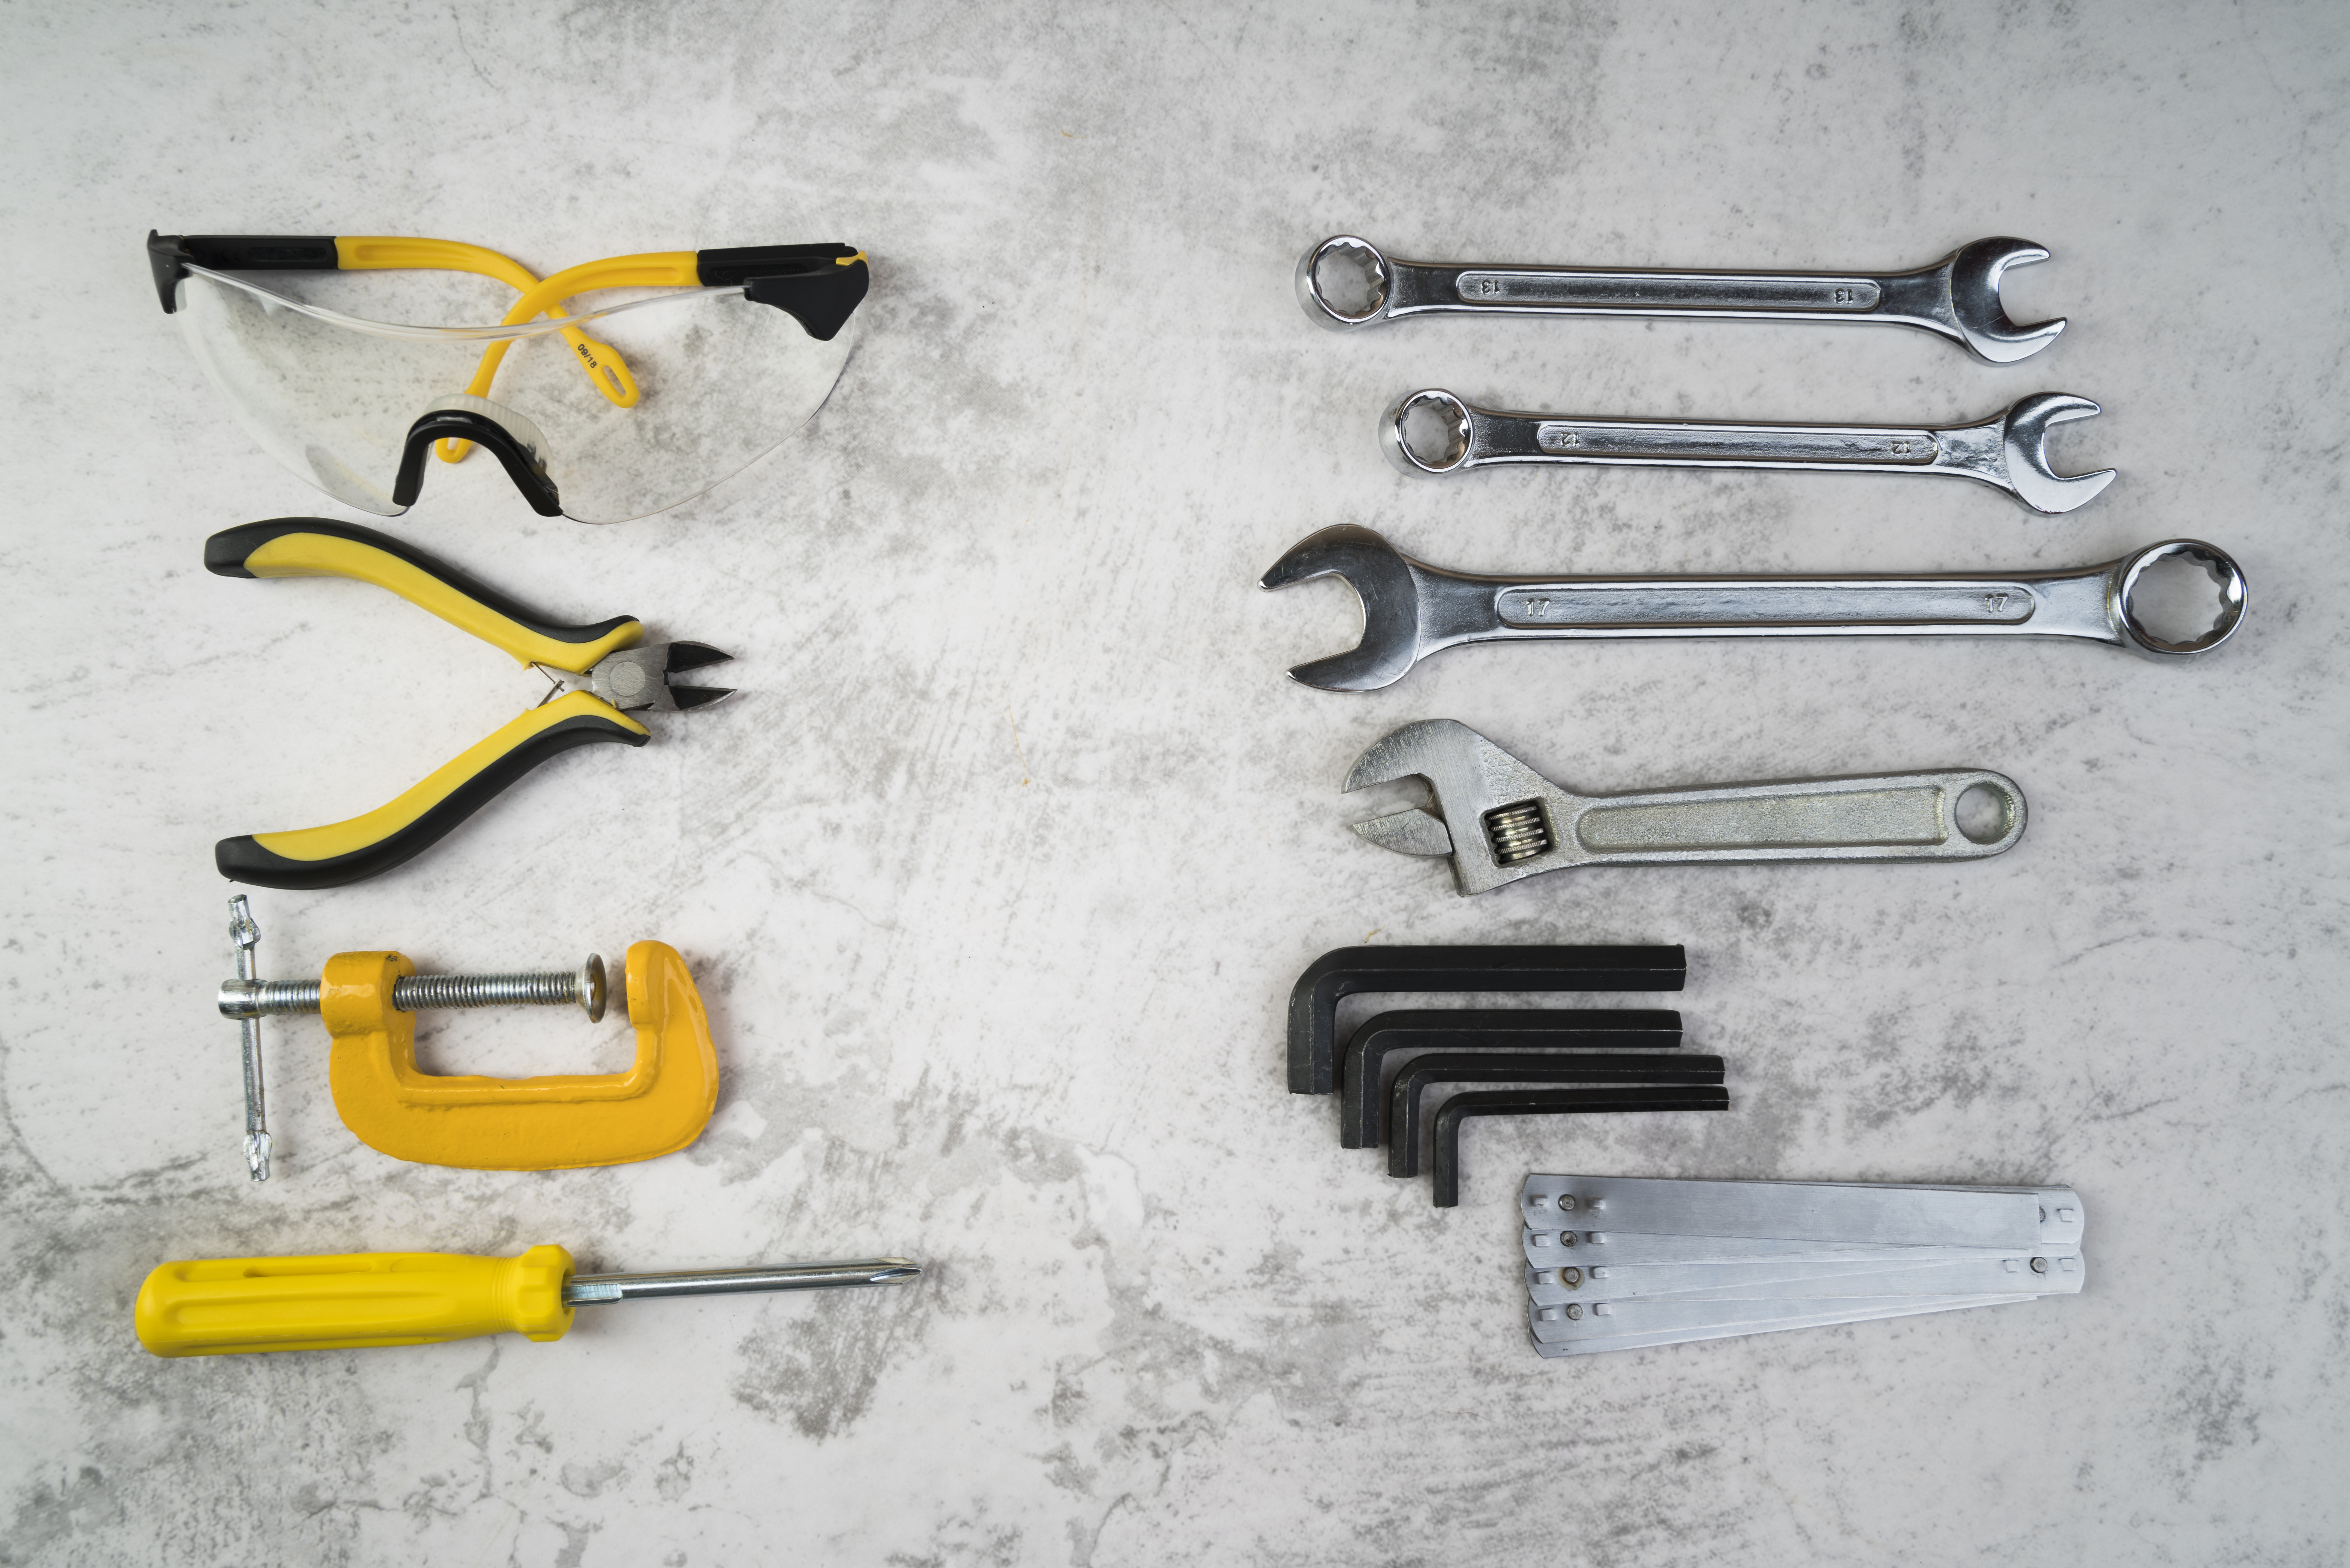 A top-view photograph of a collection of different types of tools, such as hammers, screwdrivers, pliers, wrenches, and more, arranged in a scattered or organized manner, showcasing a variety of shapes, sizes, and functions